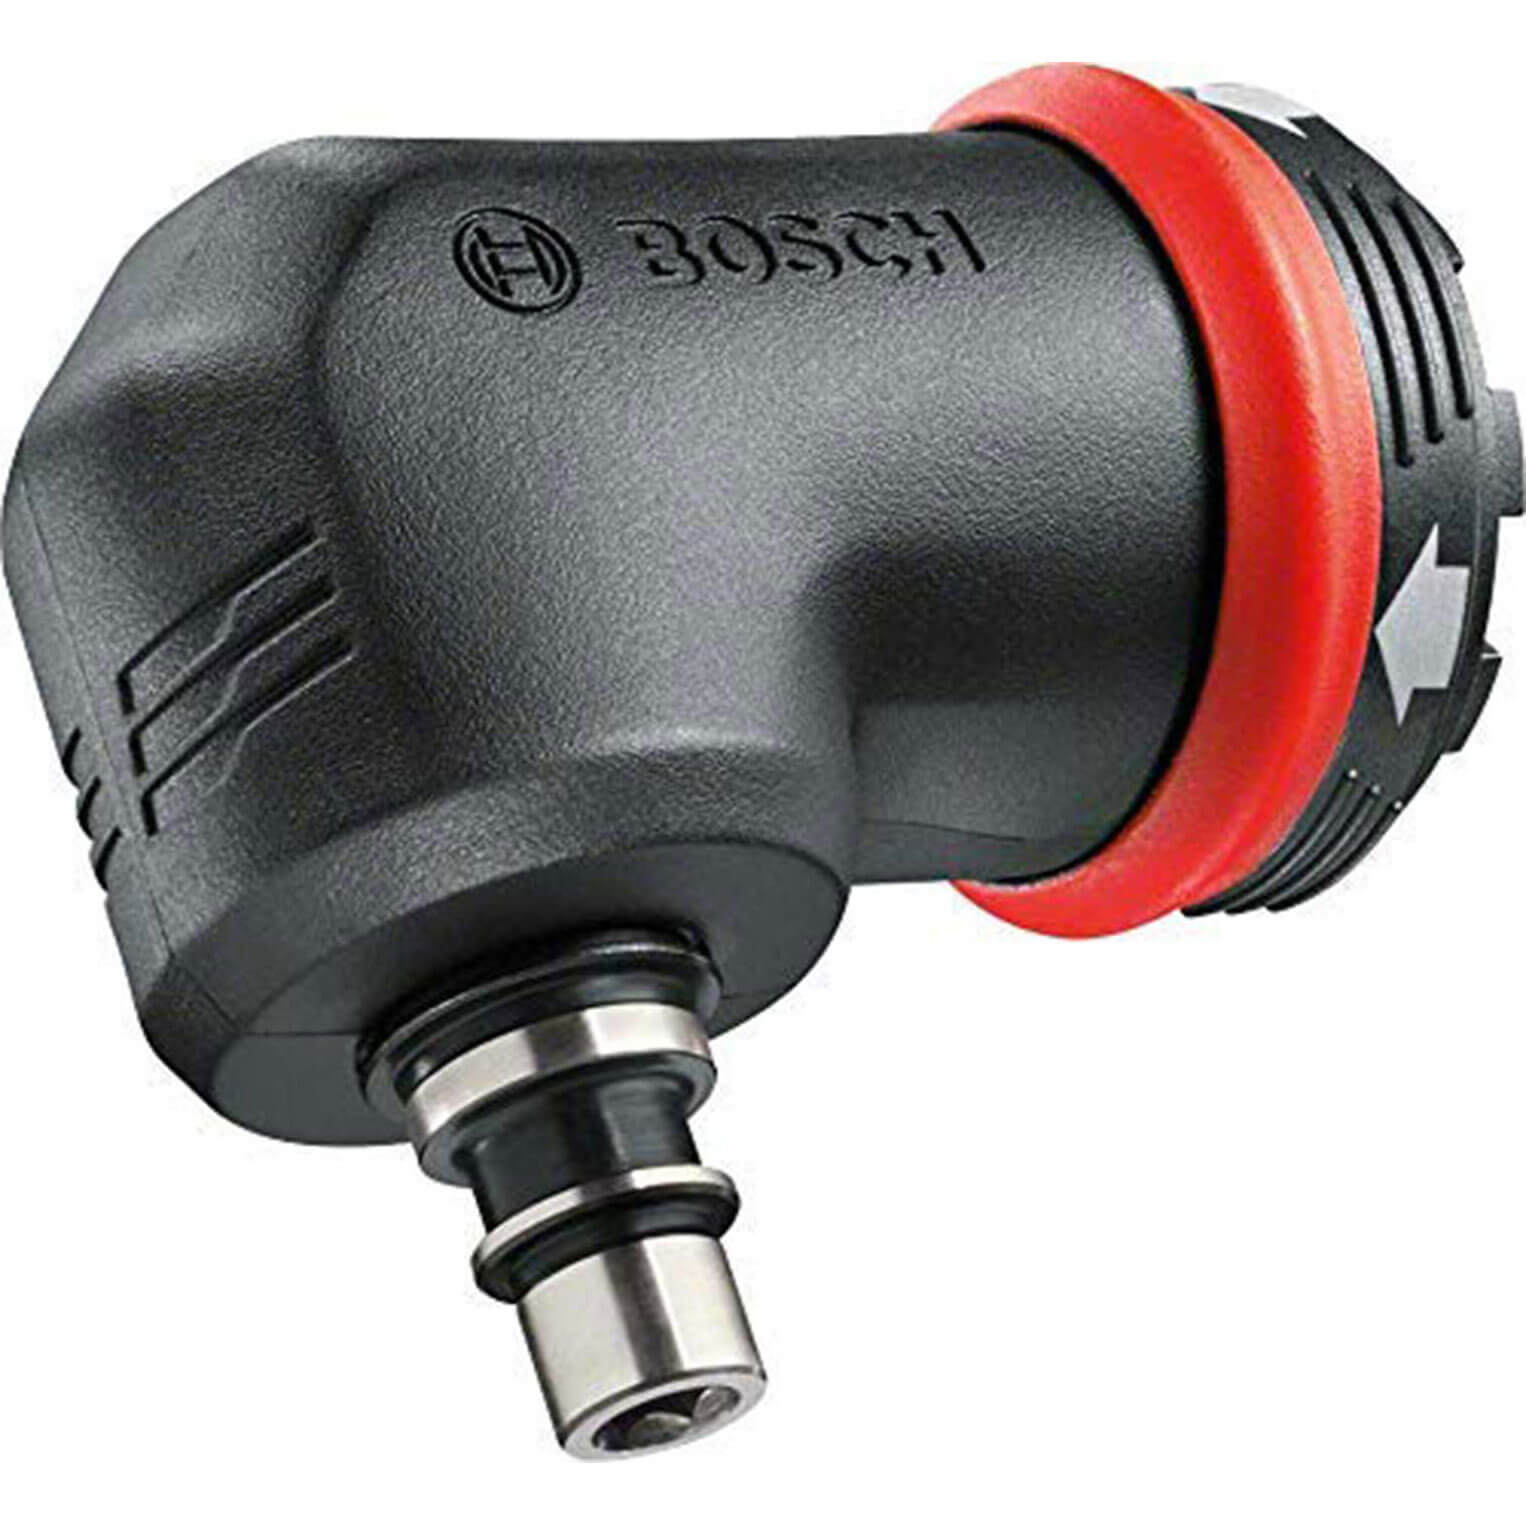 Photos - Power Tool Accessory Bosch Angled Screwdriver Adapter for ADVANCEDDRILL/IMPACT 18 